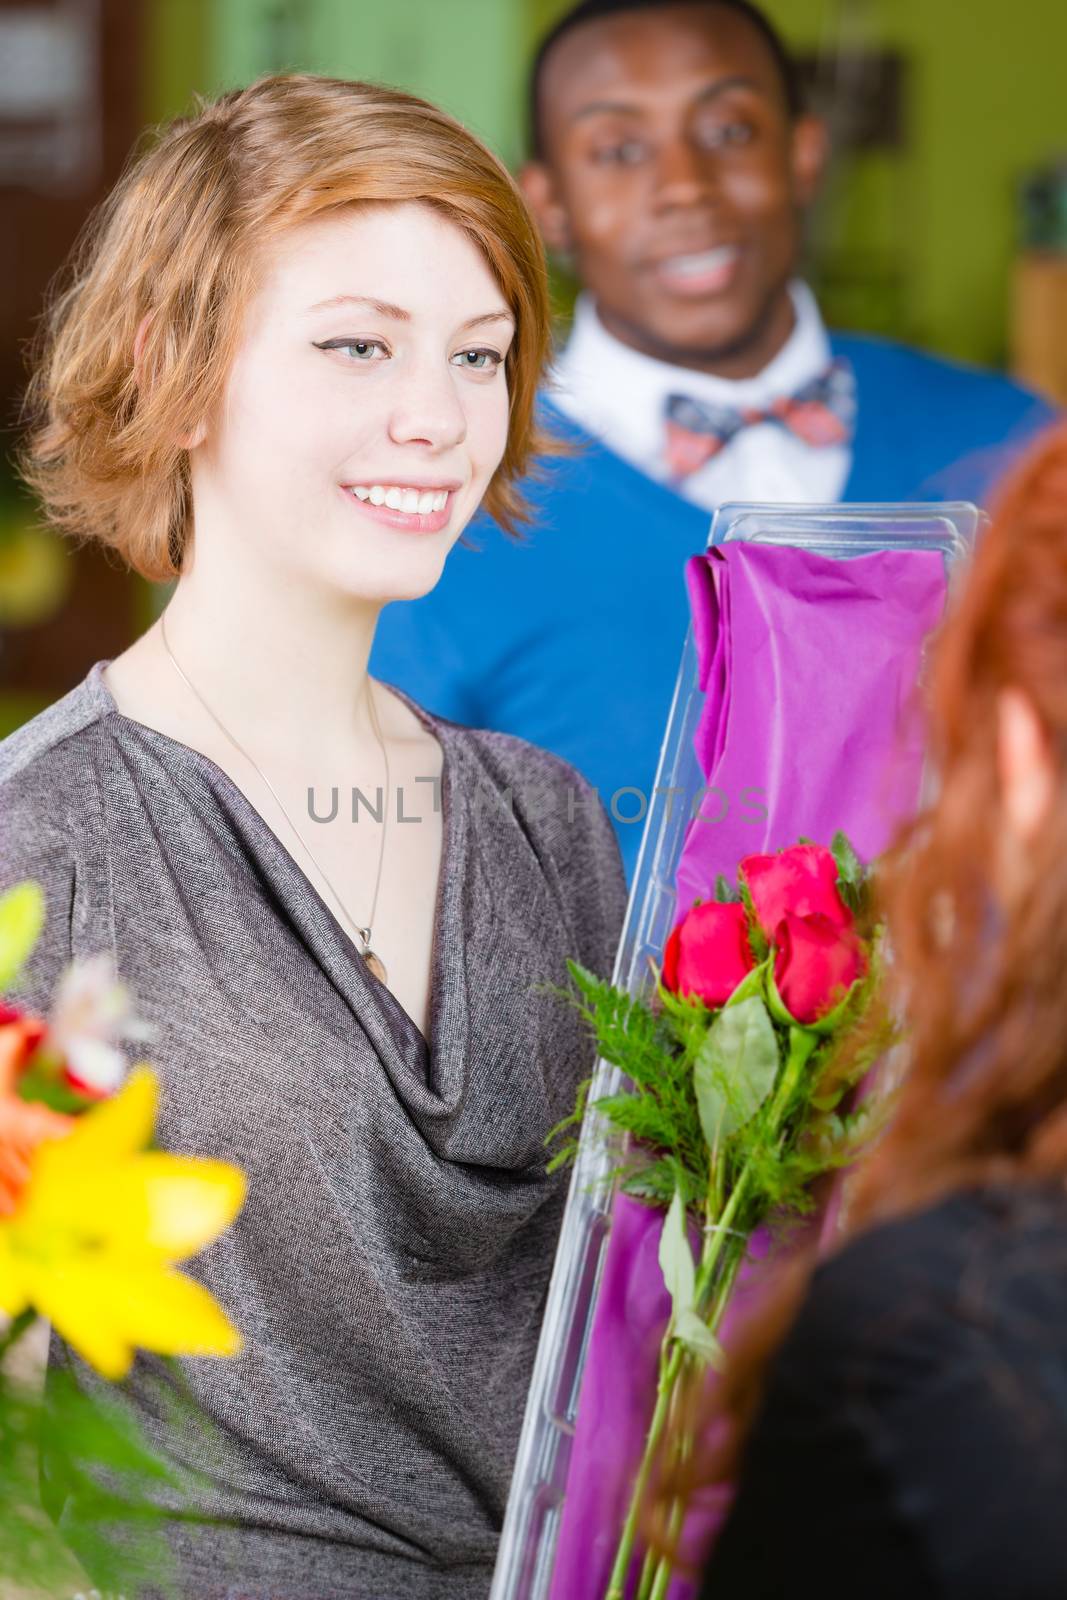 Teenager buying roses at a florist shop